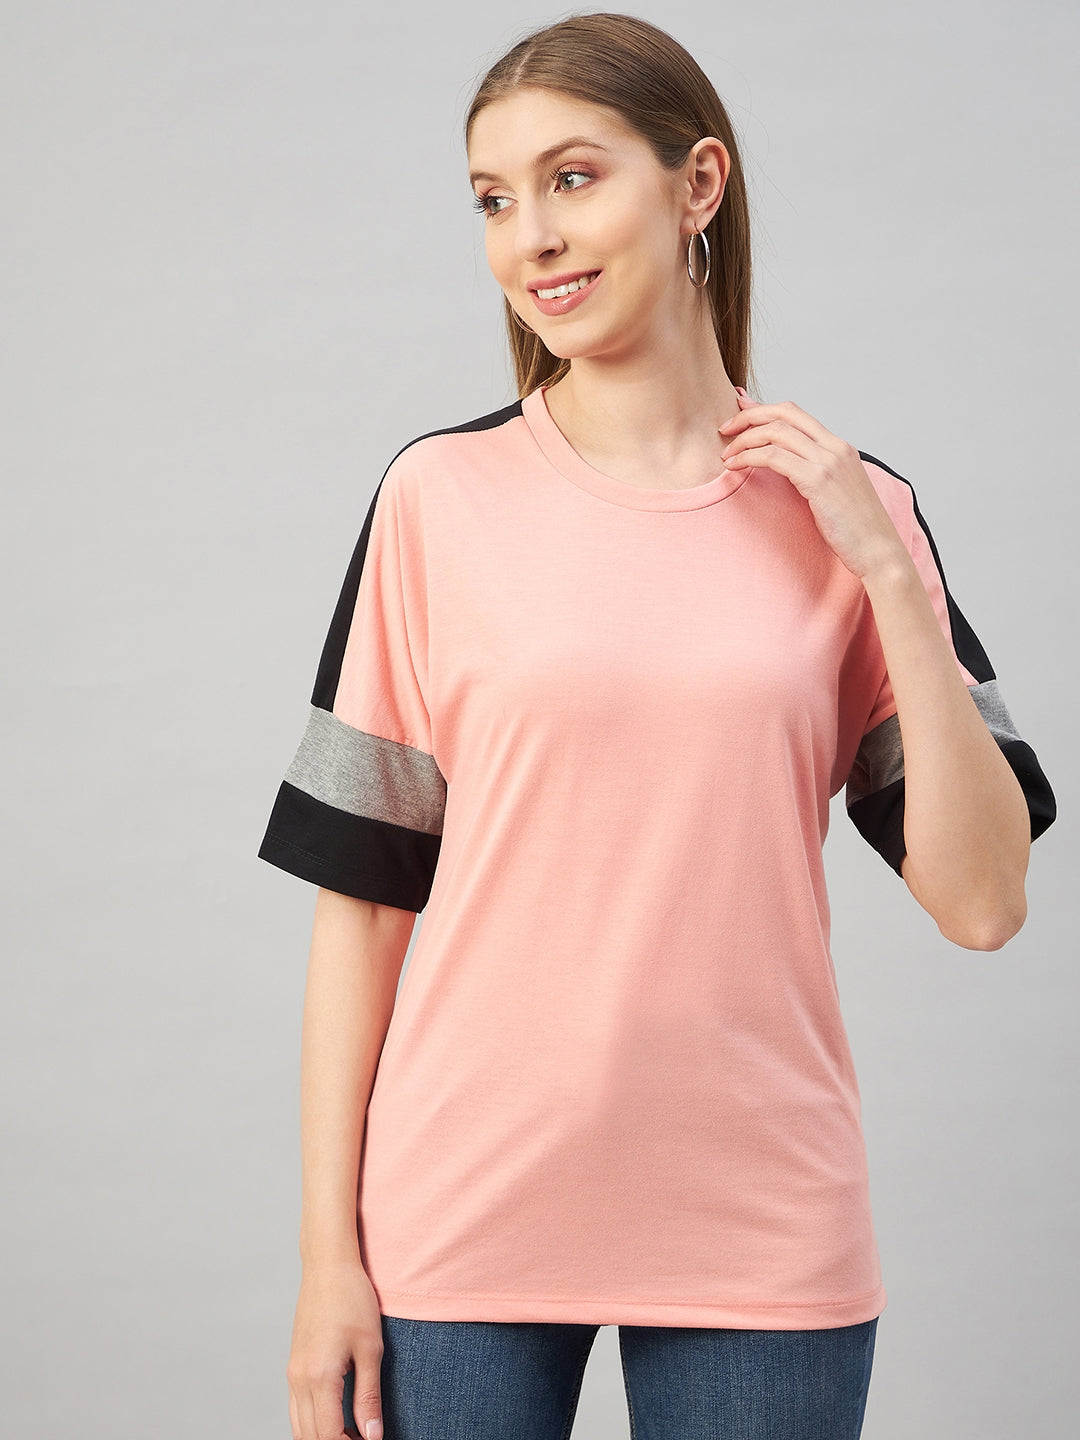 Austin Wood Women Solid Casual Top